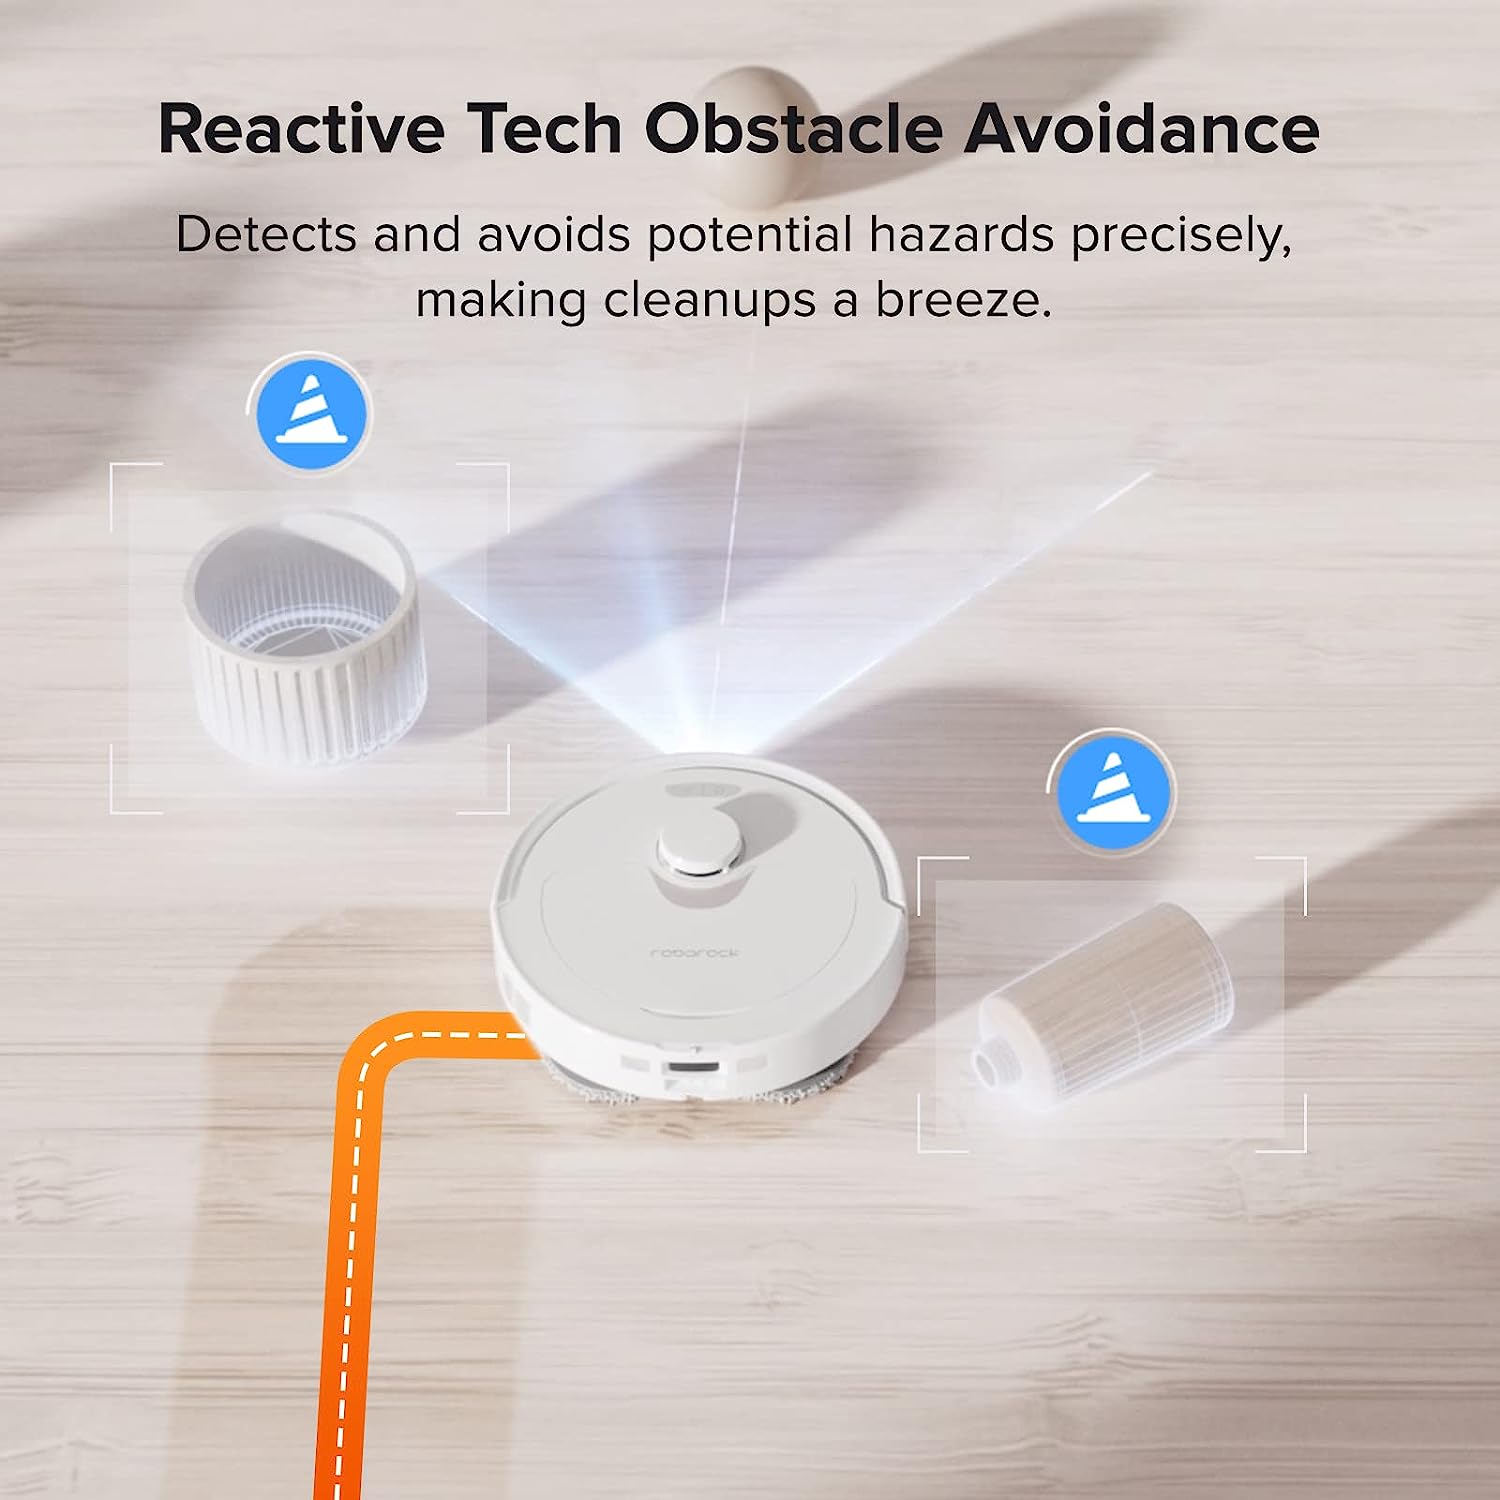 Roborock Robot Vacuum and Mop, Auto-Drying, Auto Mop Washing, Dual Spinning Mops, Auto Mop Lifting, Self-Refilling, Self-Emptying, Reactive Tech Obstacle Avoidance, 5500Pa Suction, White